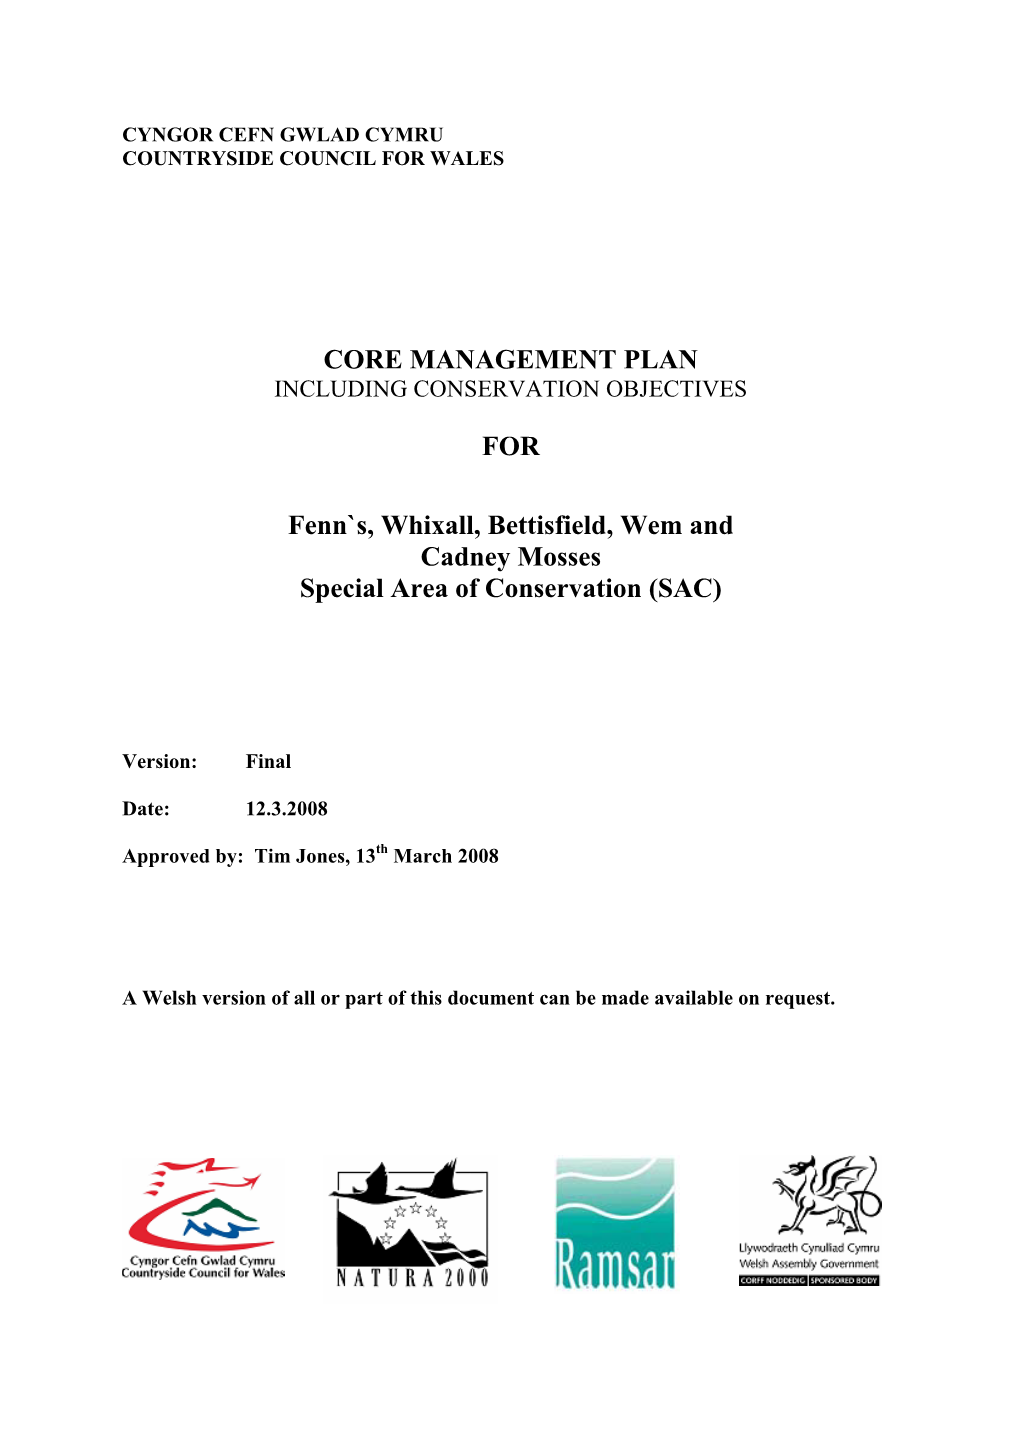 CORE MANAGEMENT PLAN for Fenn`S, Whixall, Bettisfield, Wem